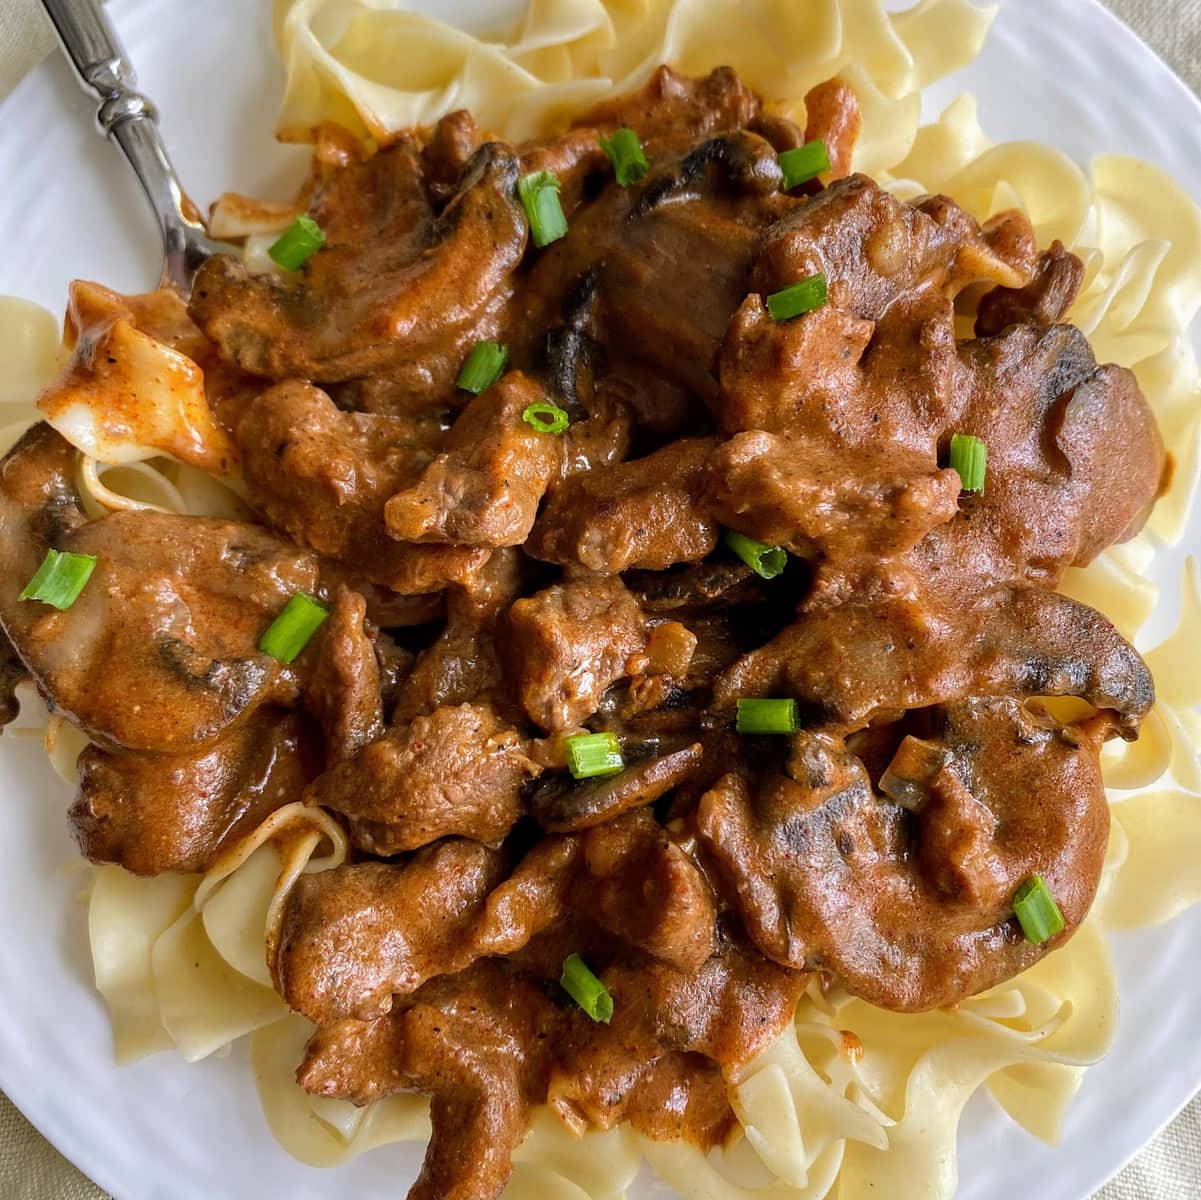 beef over pasta with mushrooms and veggies